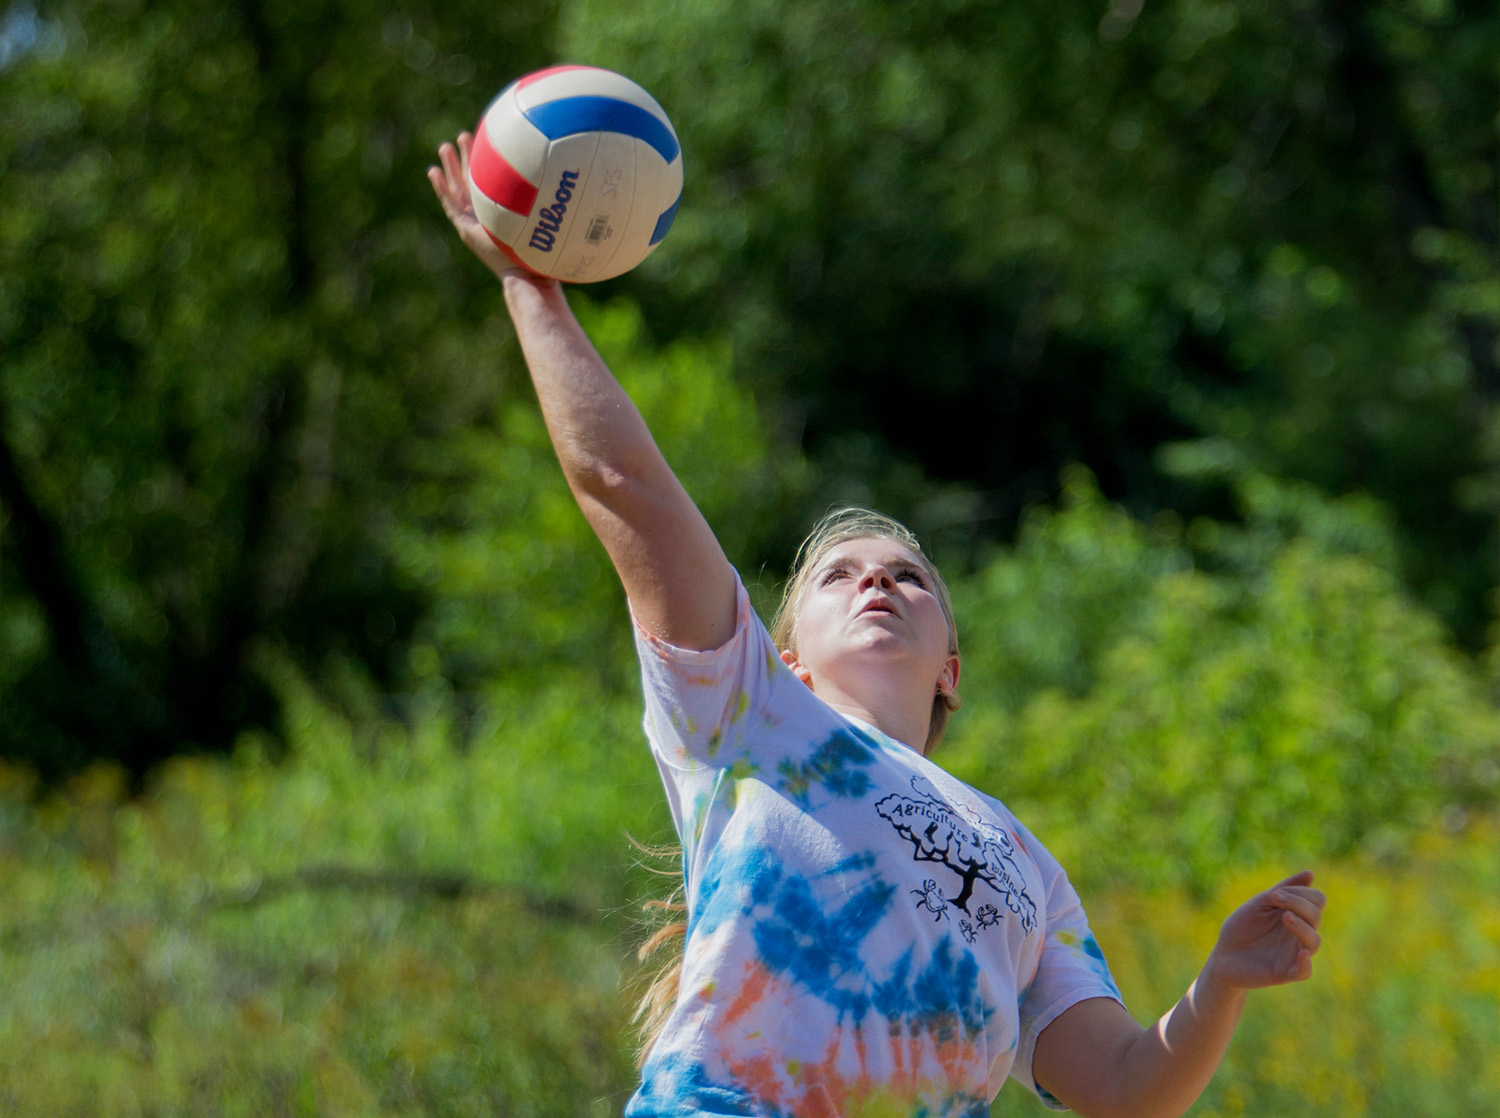 A student serves a volleyball during a sand volleyball tournament on campus